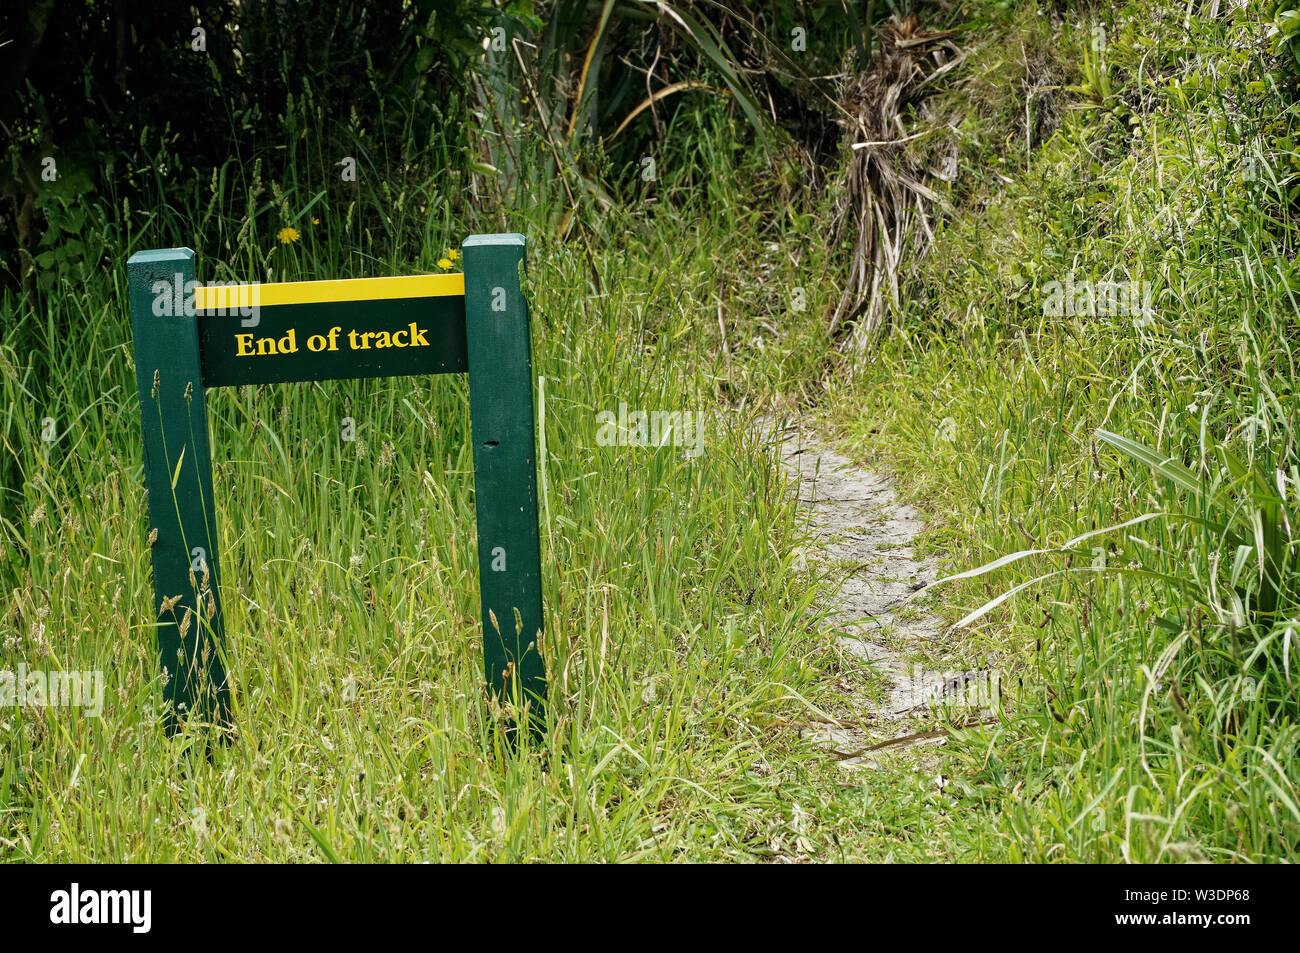 Kaihoka, Golden Bay/New Zealand - December 06, 2014: End of track sign on a Department of Conservation reserve, New Zealand. Stock Photo